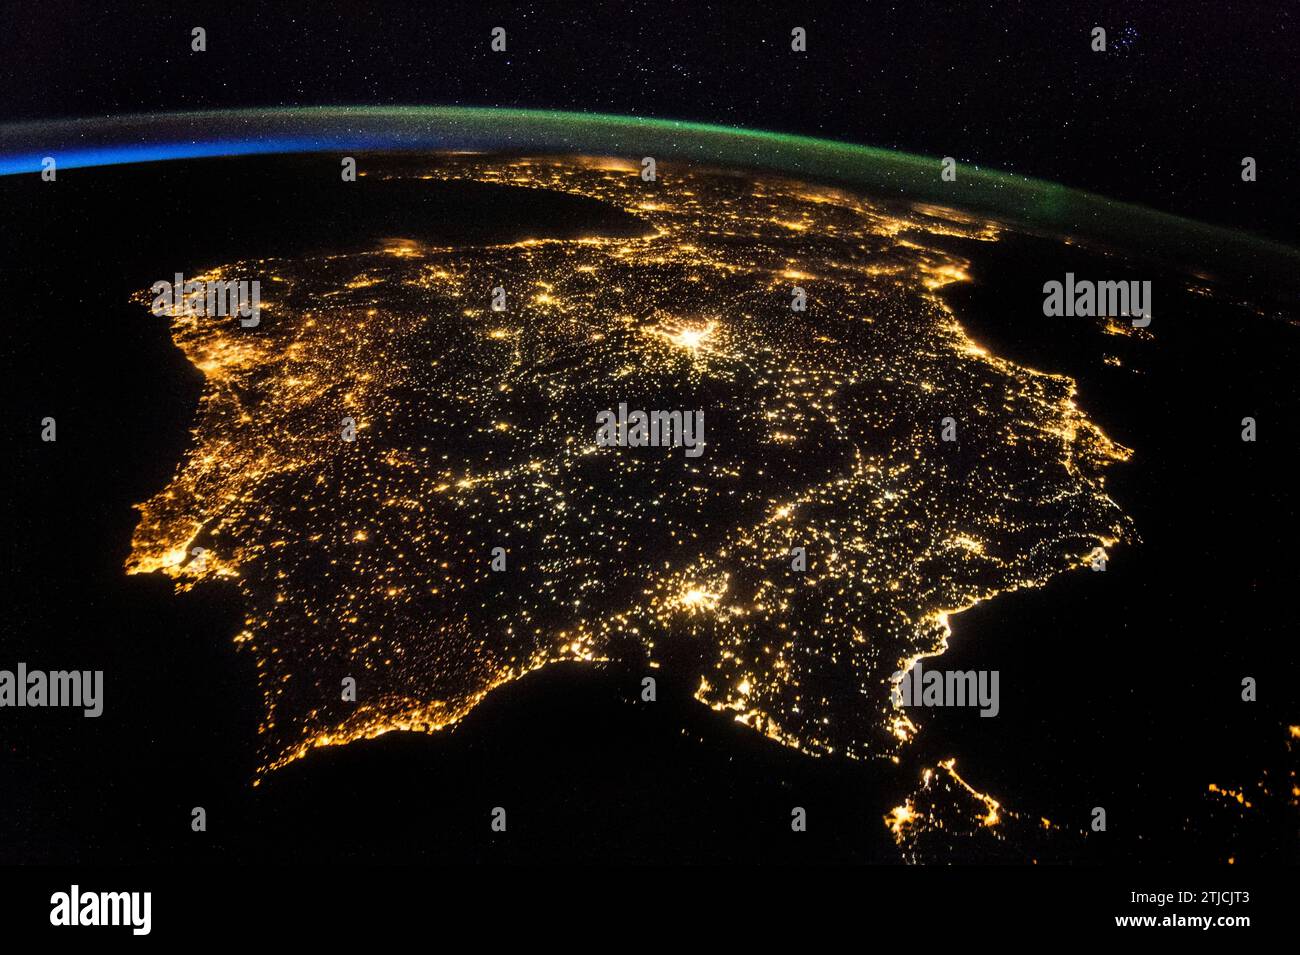 Iberian Peninsula at Night taken from the International Space Station, 26 July 2014. One of the Expedition 40 crew members aboard the International Space Station recorded this early evening photo of the entire Iberian Peninsula (Spain, Portugal and Andorra) on 26 July 2014. Part of France can be seen at the top of the image and the Strait of Gibraltar is visible at bottom, with a very small portion of Morocco visible near the lower right corner.  An Optimised version of an original NASA image / Credit: NASA Stock Photo